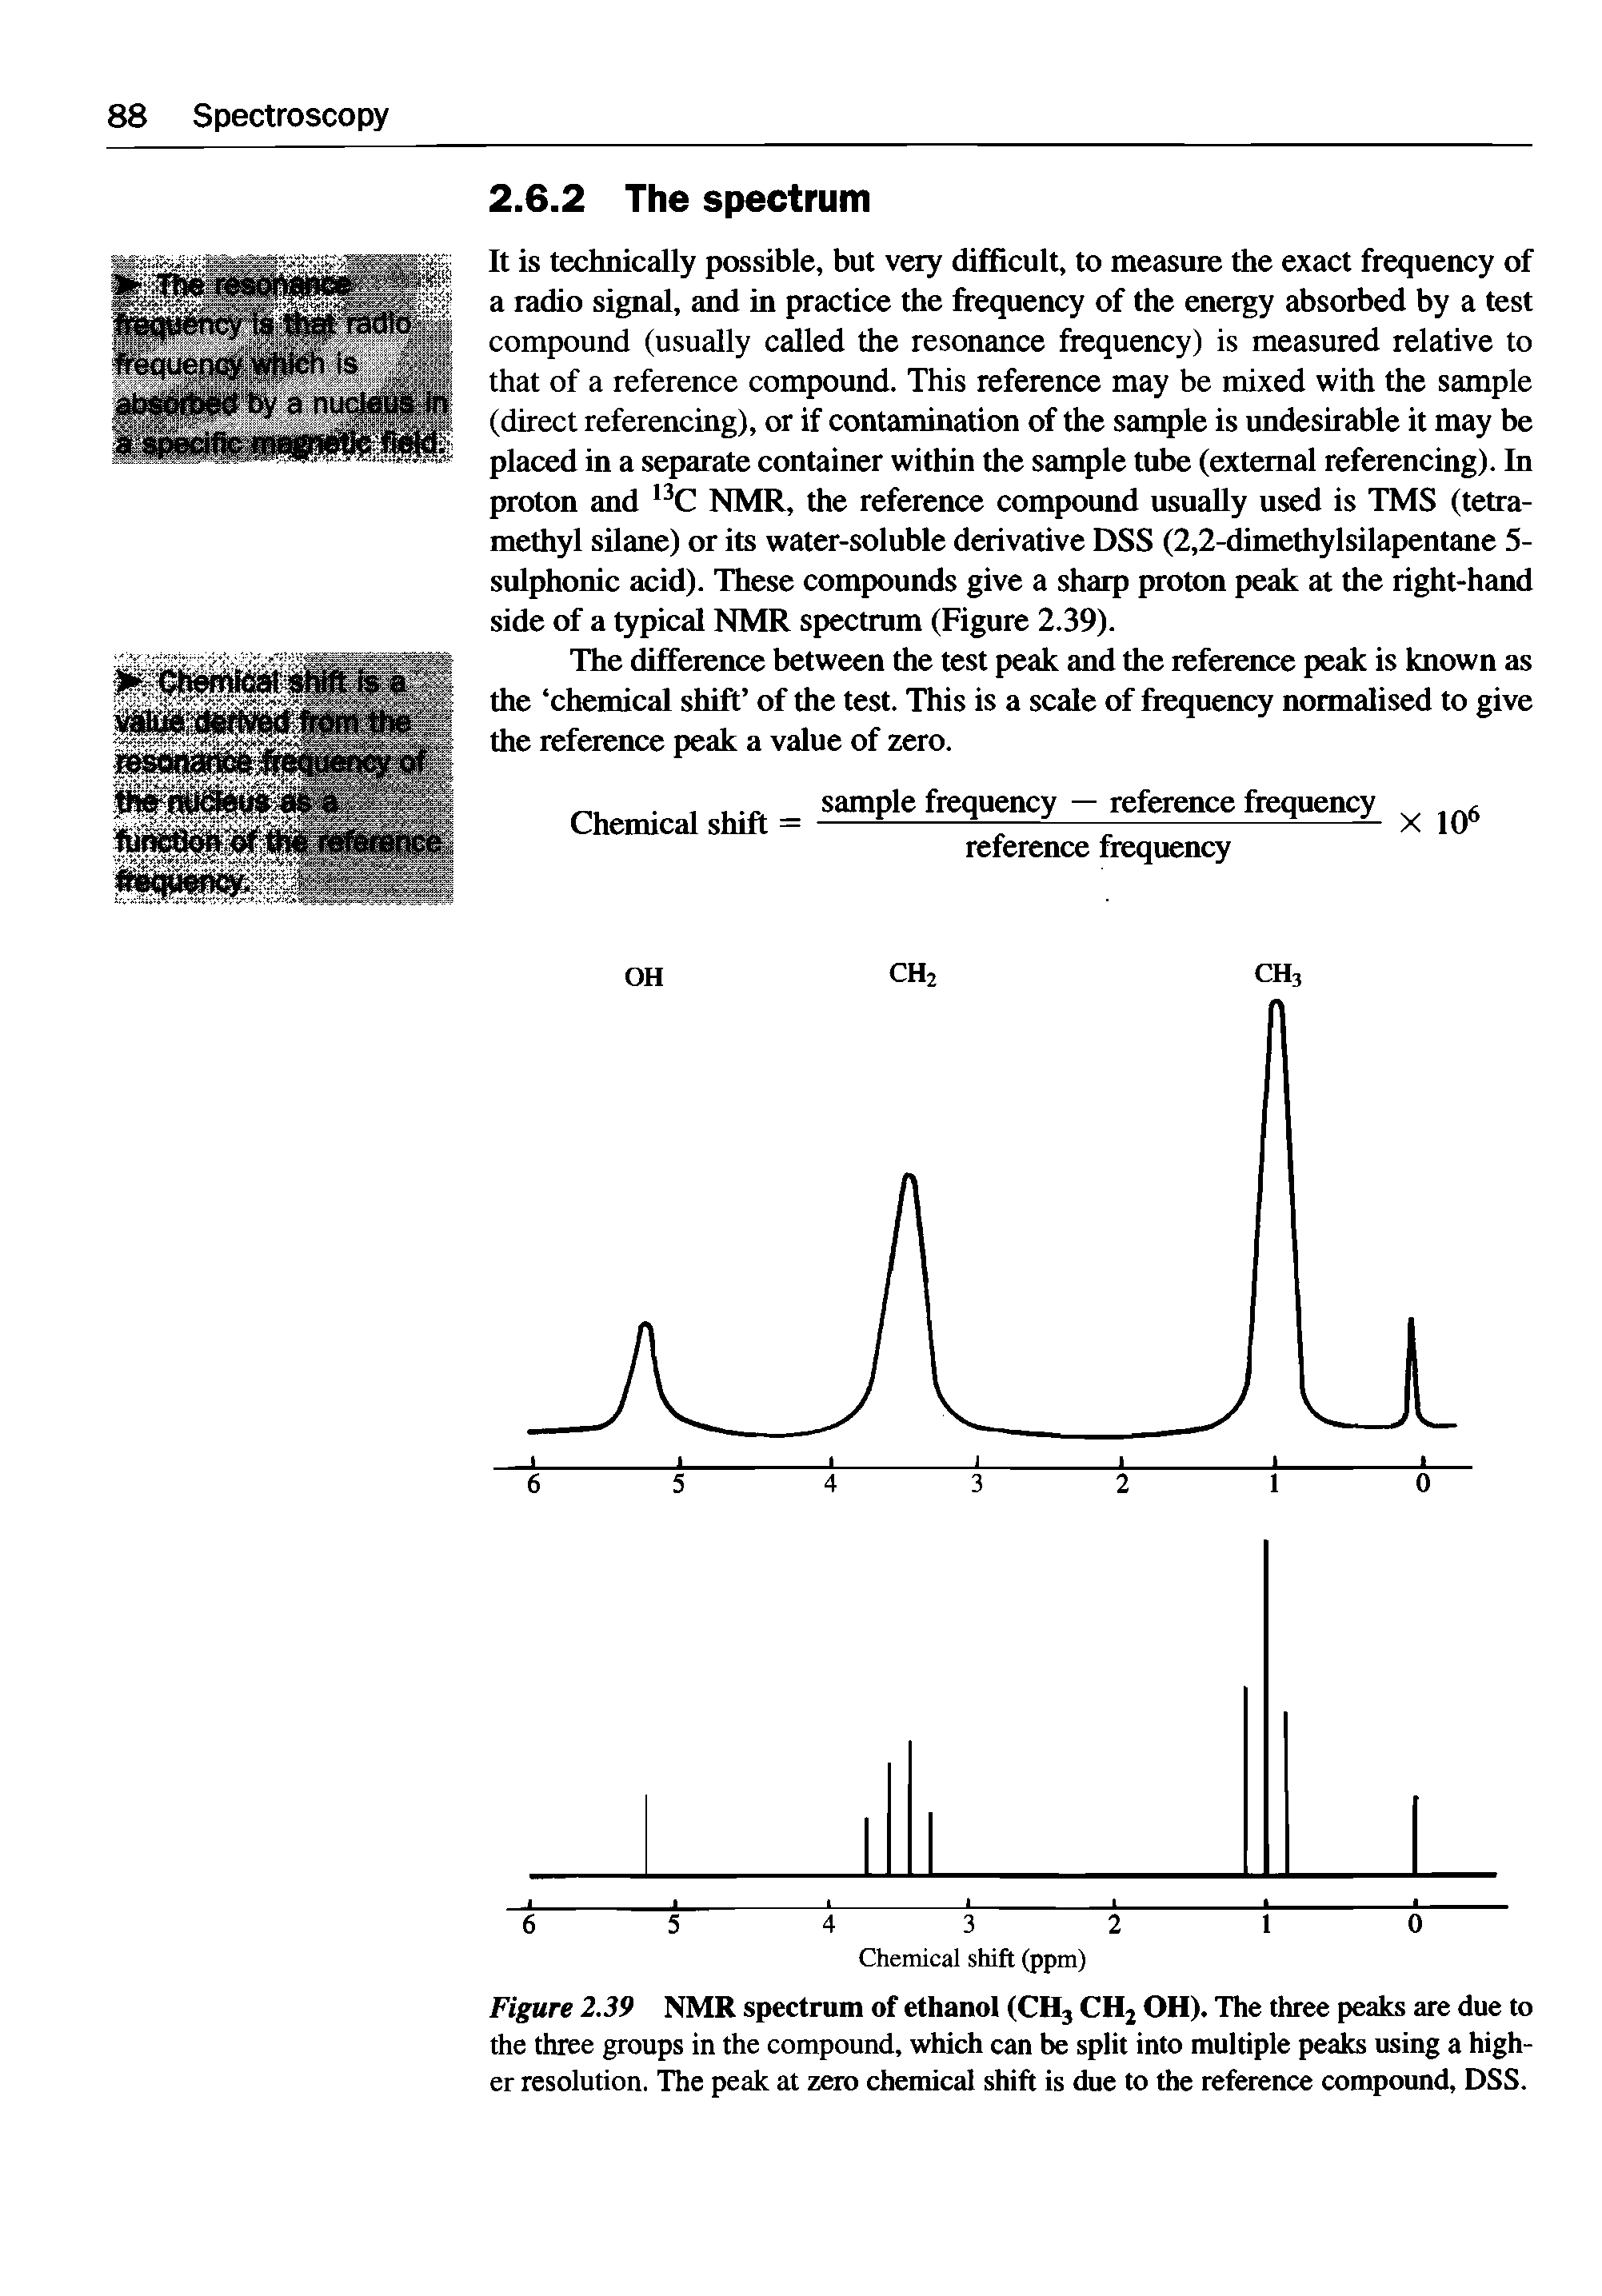 Figure 2.39 NMR spectrum of ethanol (CH3 CH2 OH). The three peaks are due to the three groups in the compound, which can be split into multiple peaks using a higher resolution. The peak at zero chemical shift is due to the reference compound, DSS.